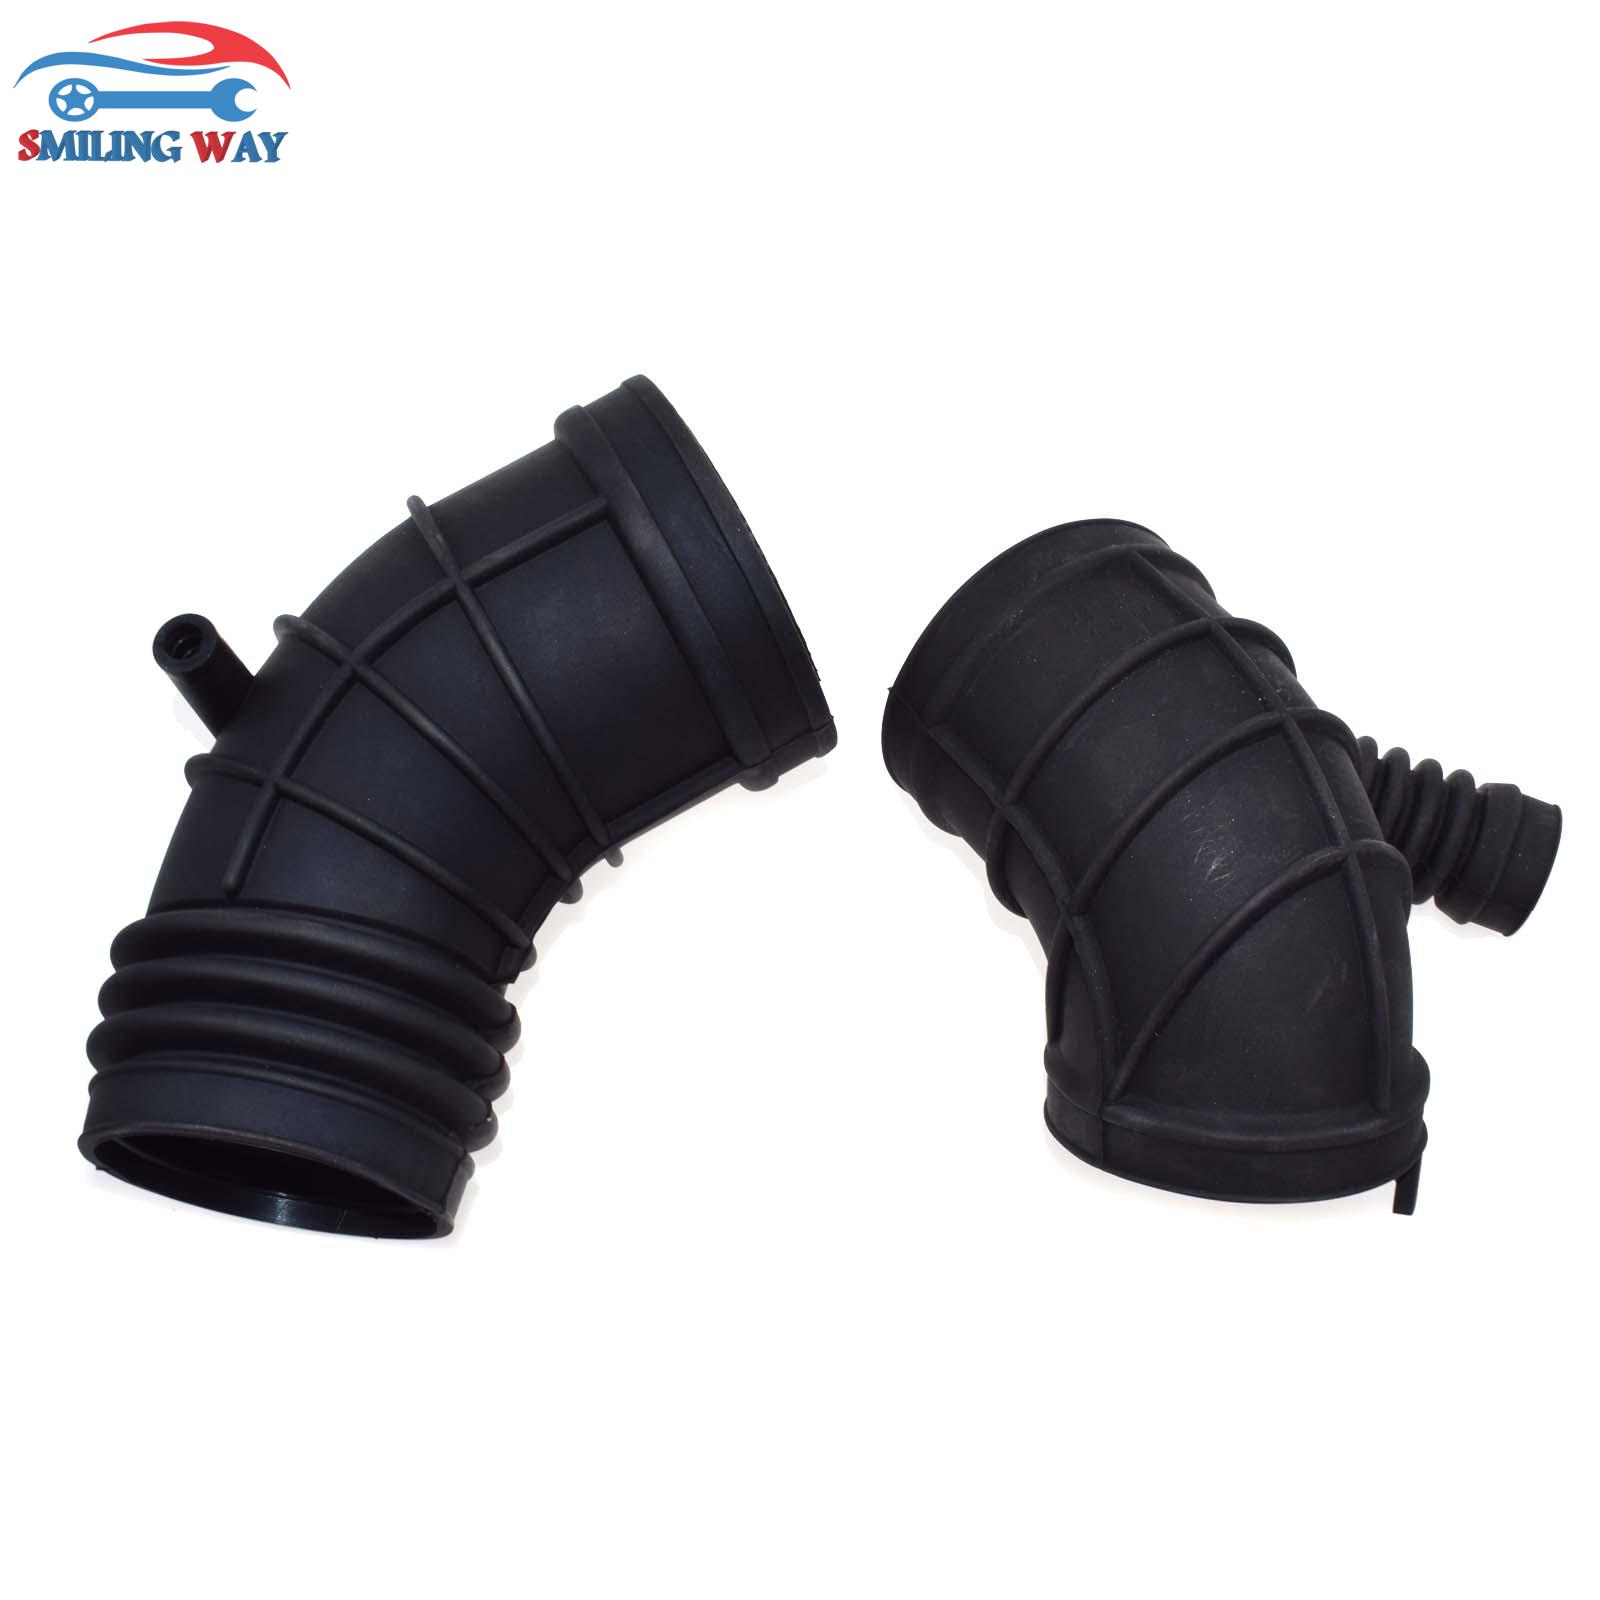 SMILING WAY Intake Air Flow Meter Boot Rubber Hose Pipe For BMW E46 325 330 i / Xi / Ci Z3 OE# 13541438759 , 13541438761